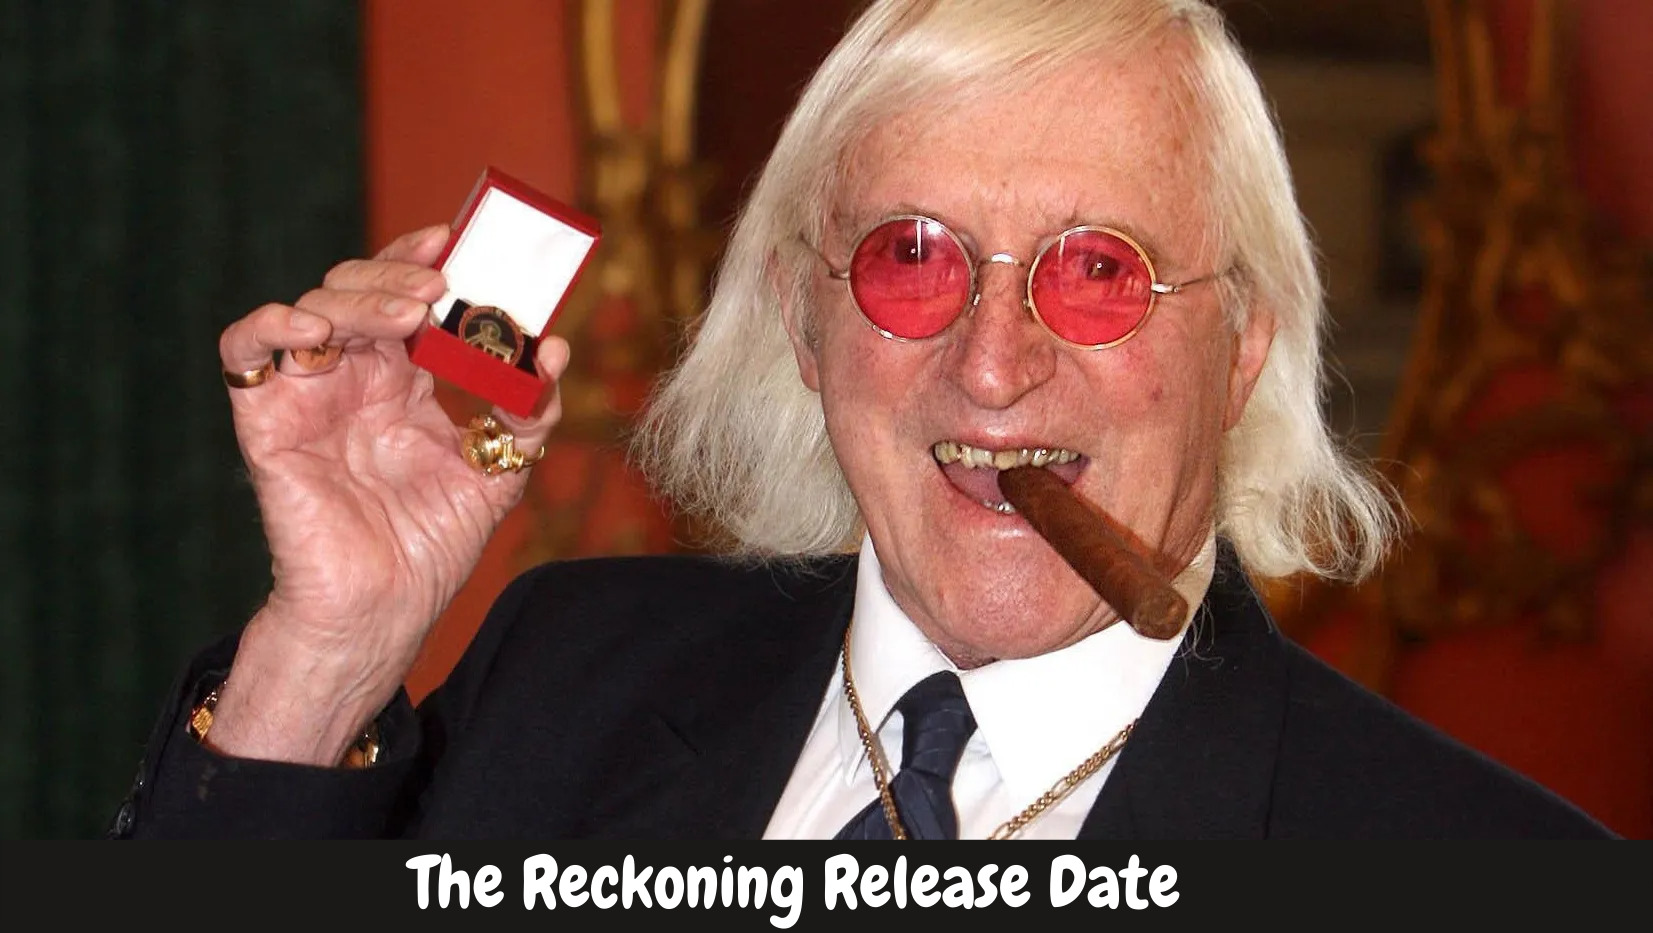 The Reckoning Release Date